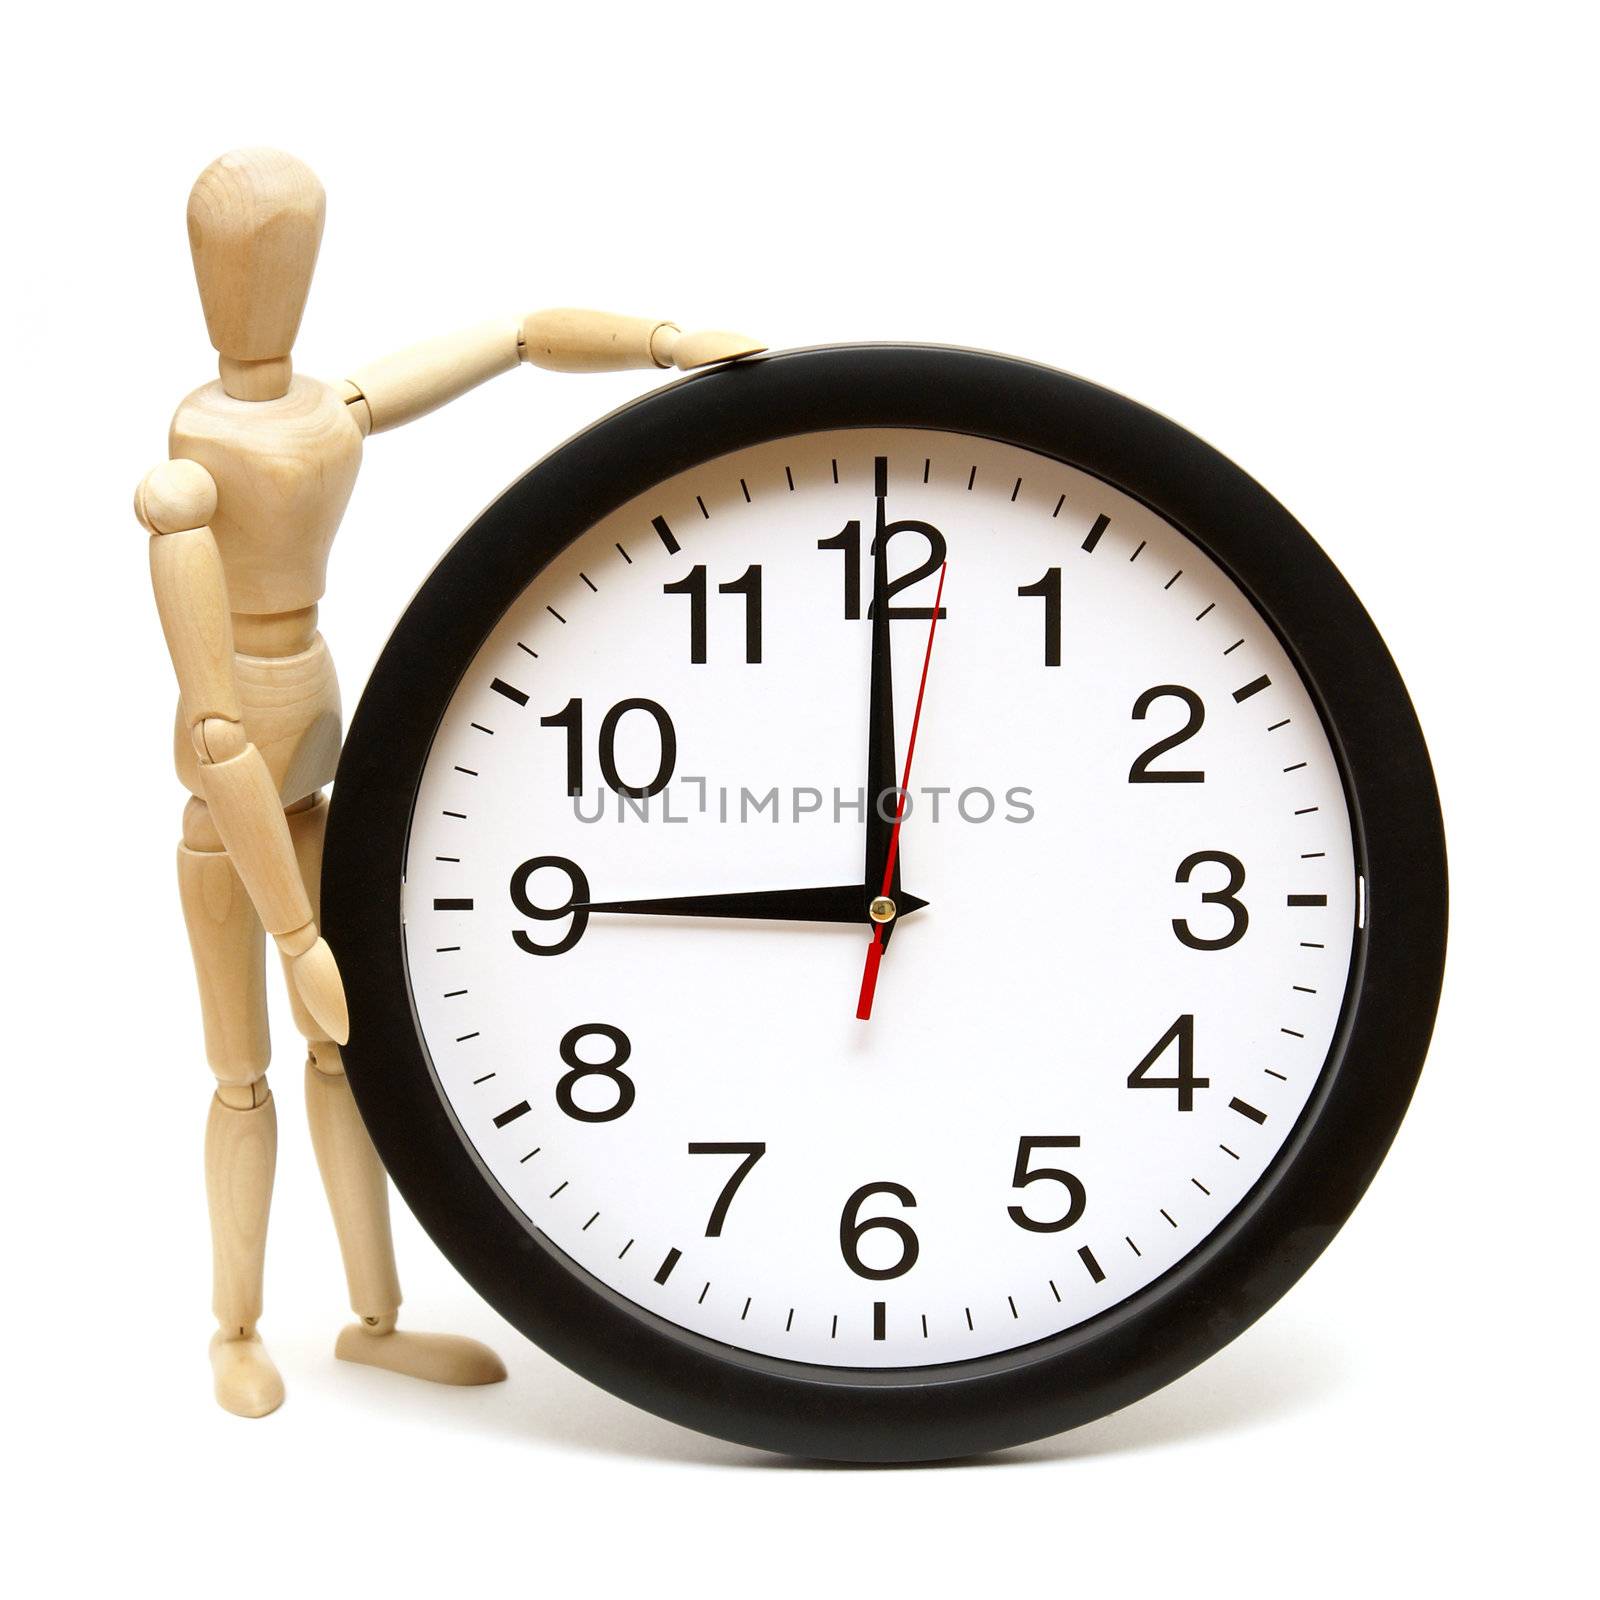 A mannequin and clock are isolated on white to represent time management.